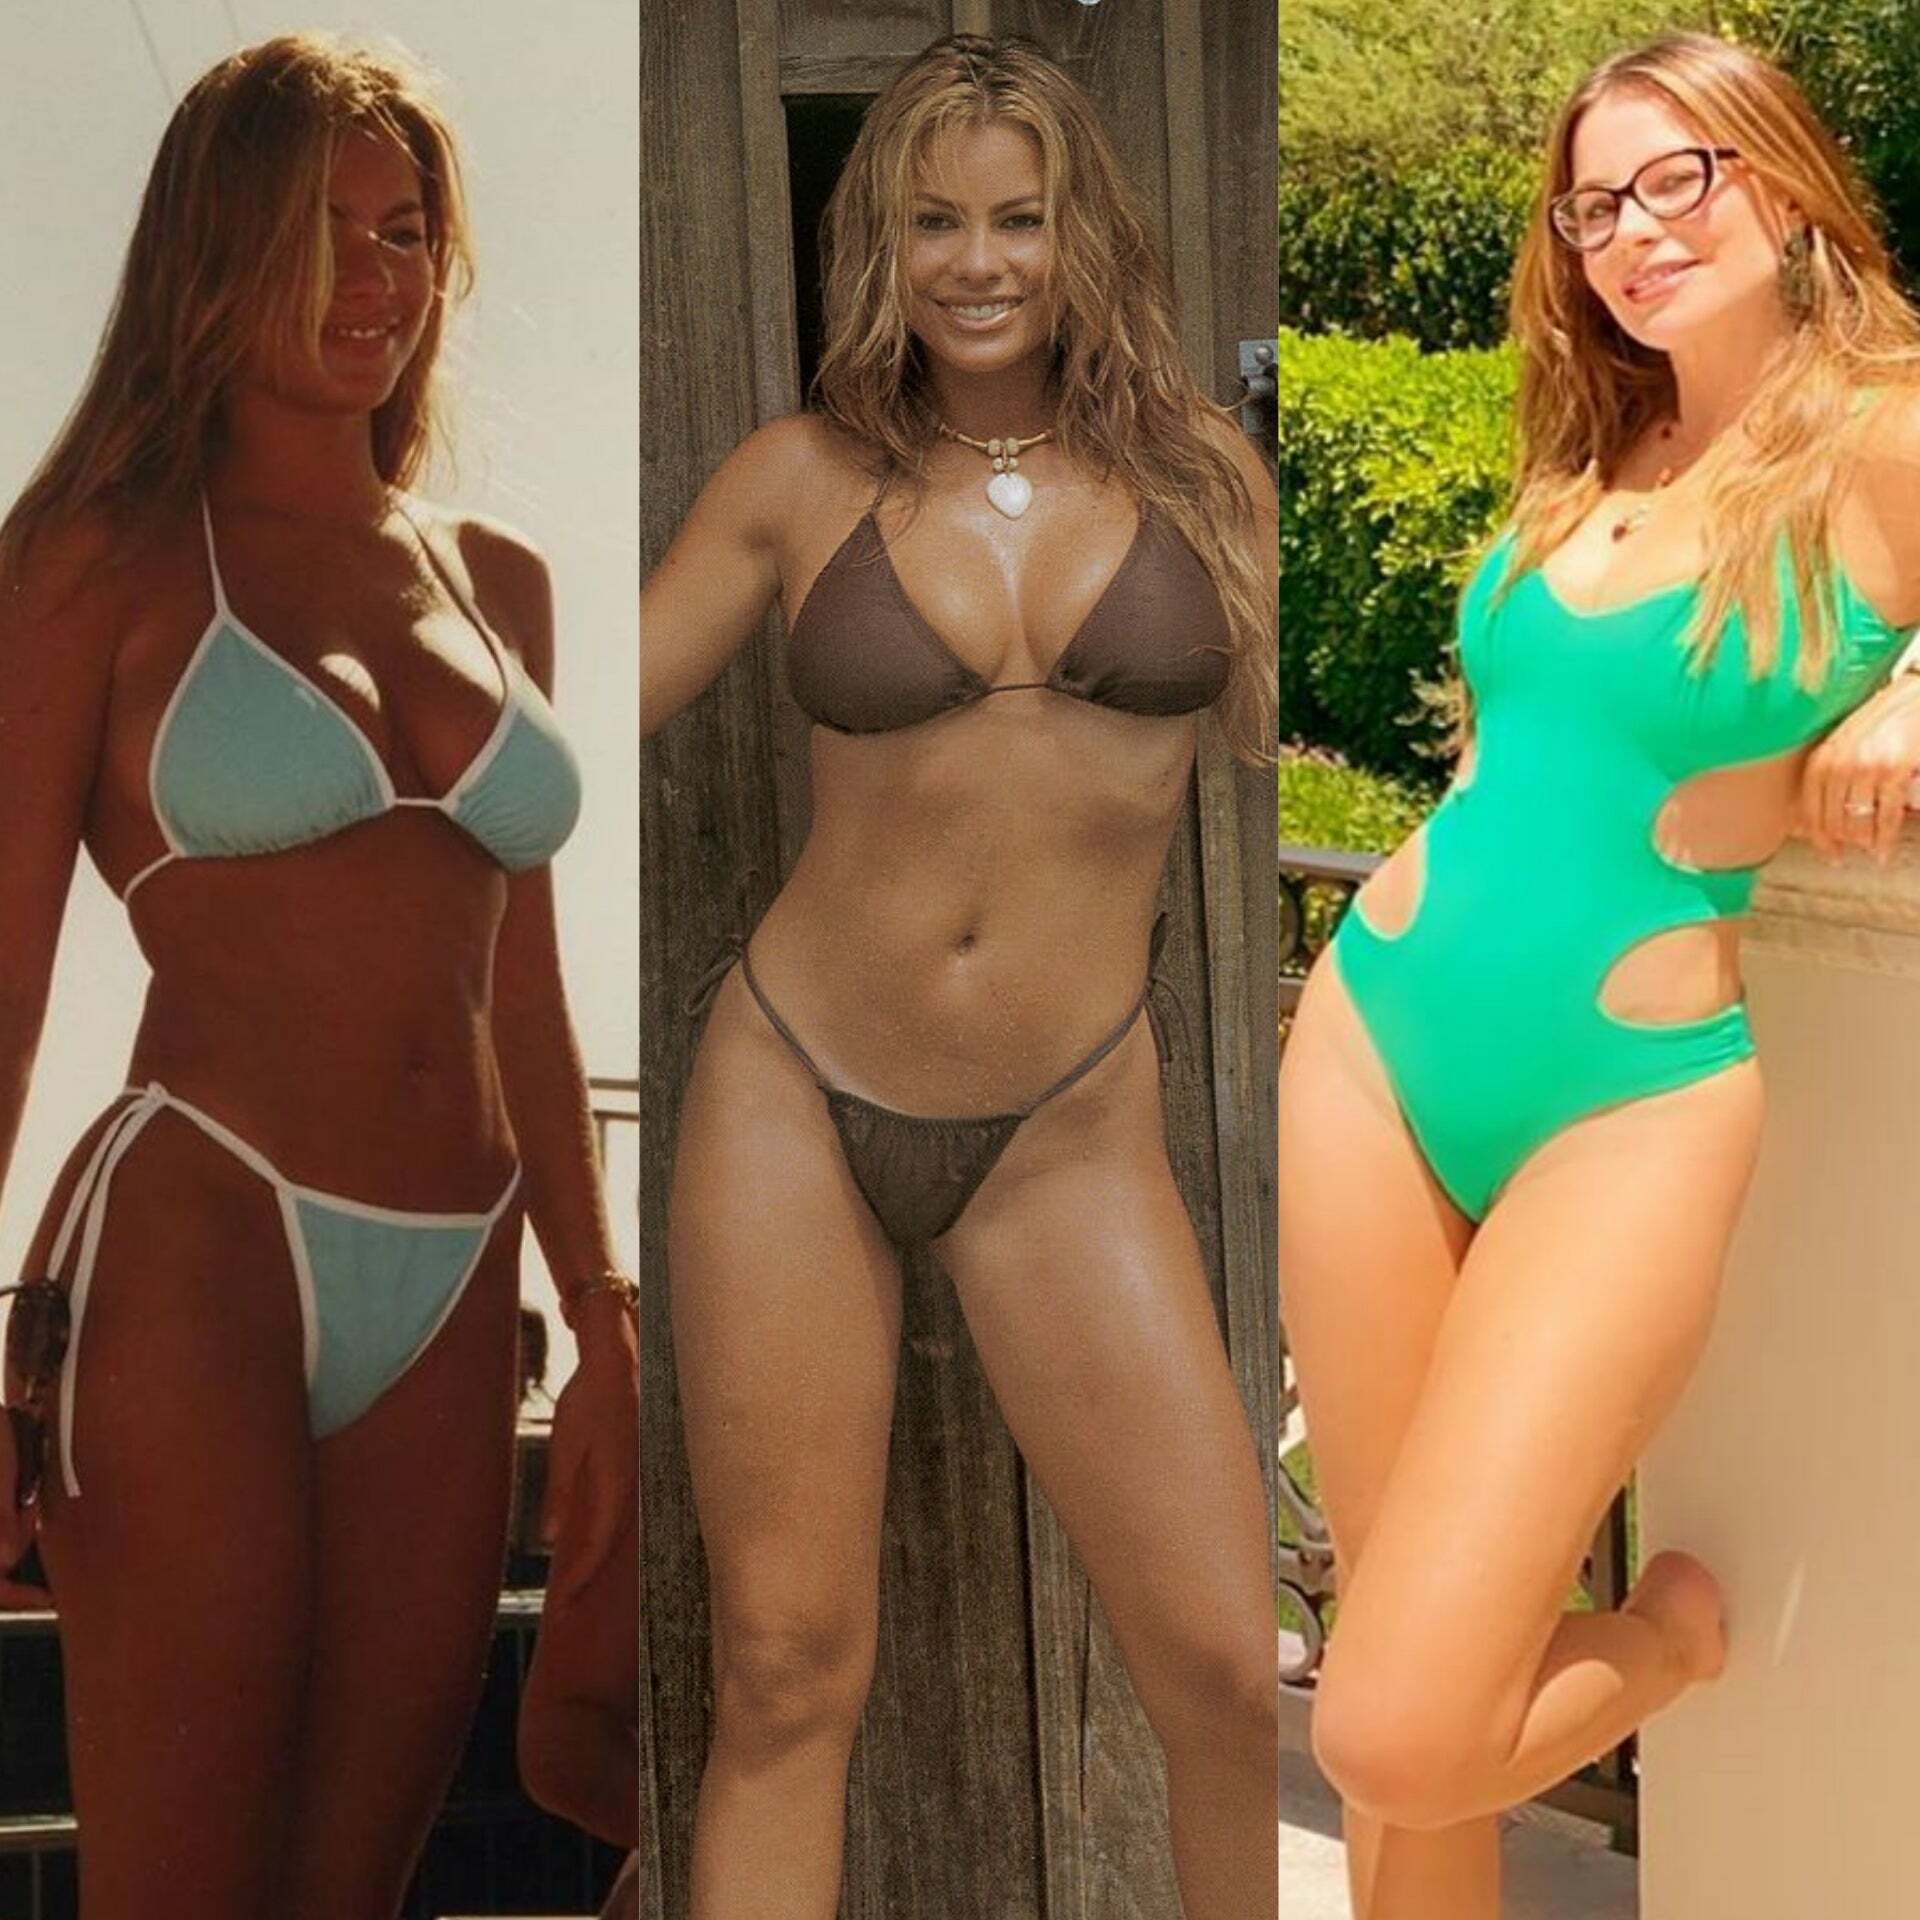 Sofia Vergara at 18, 25 and 48 years old